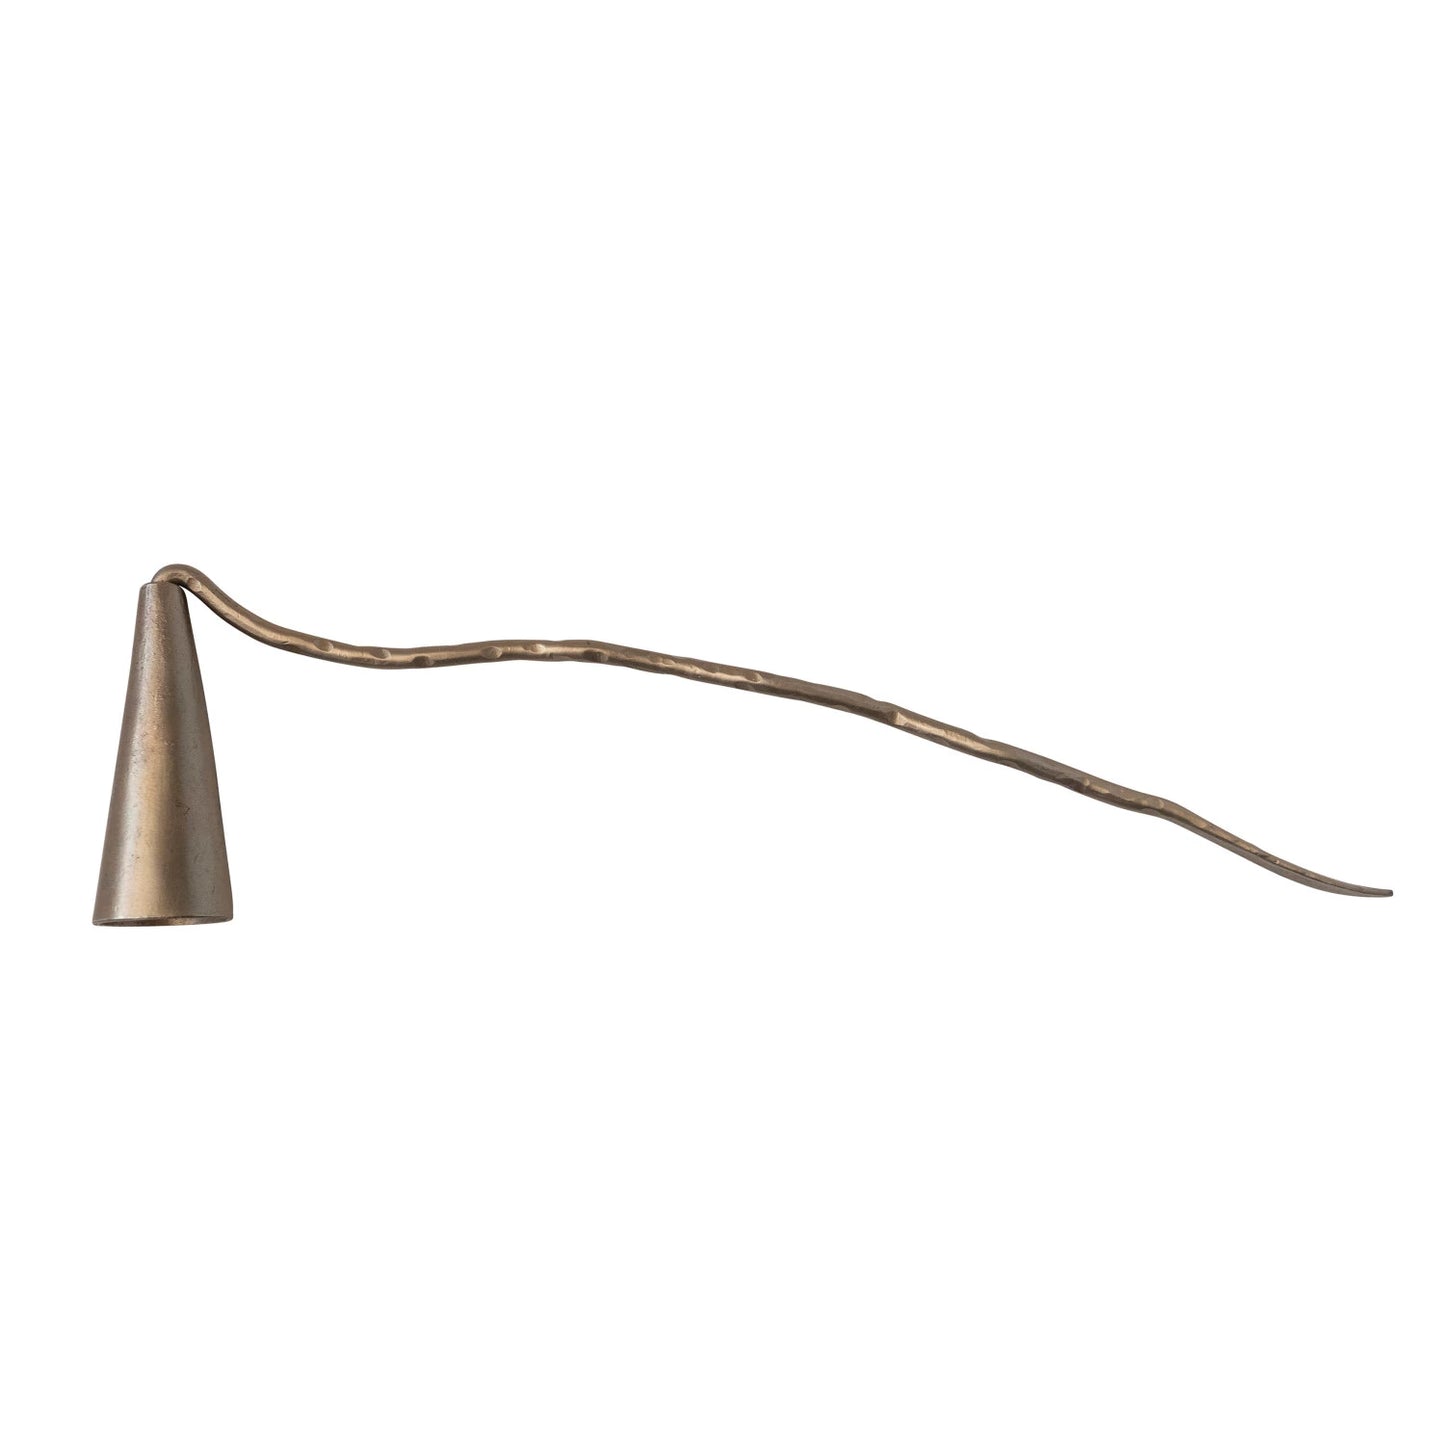 Metal Candle Snuffer, The Feathered Farmhouse